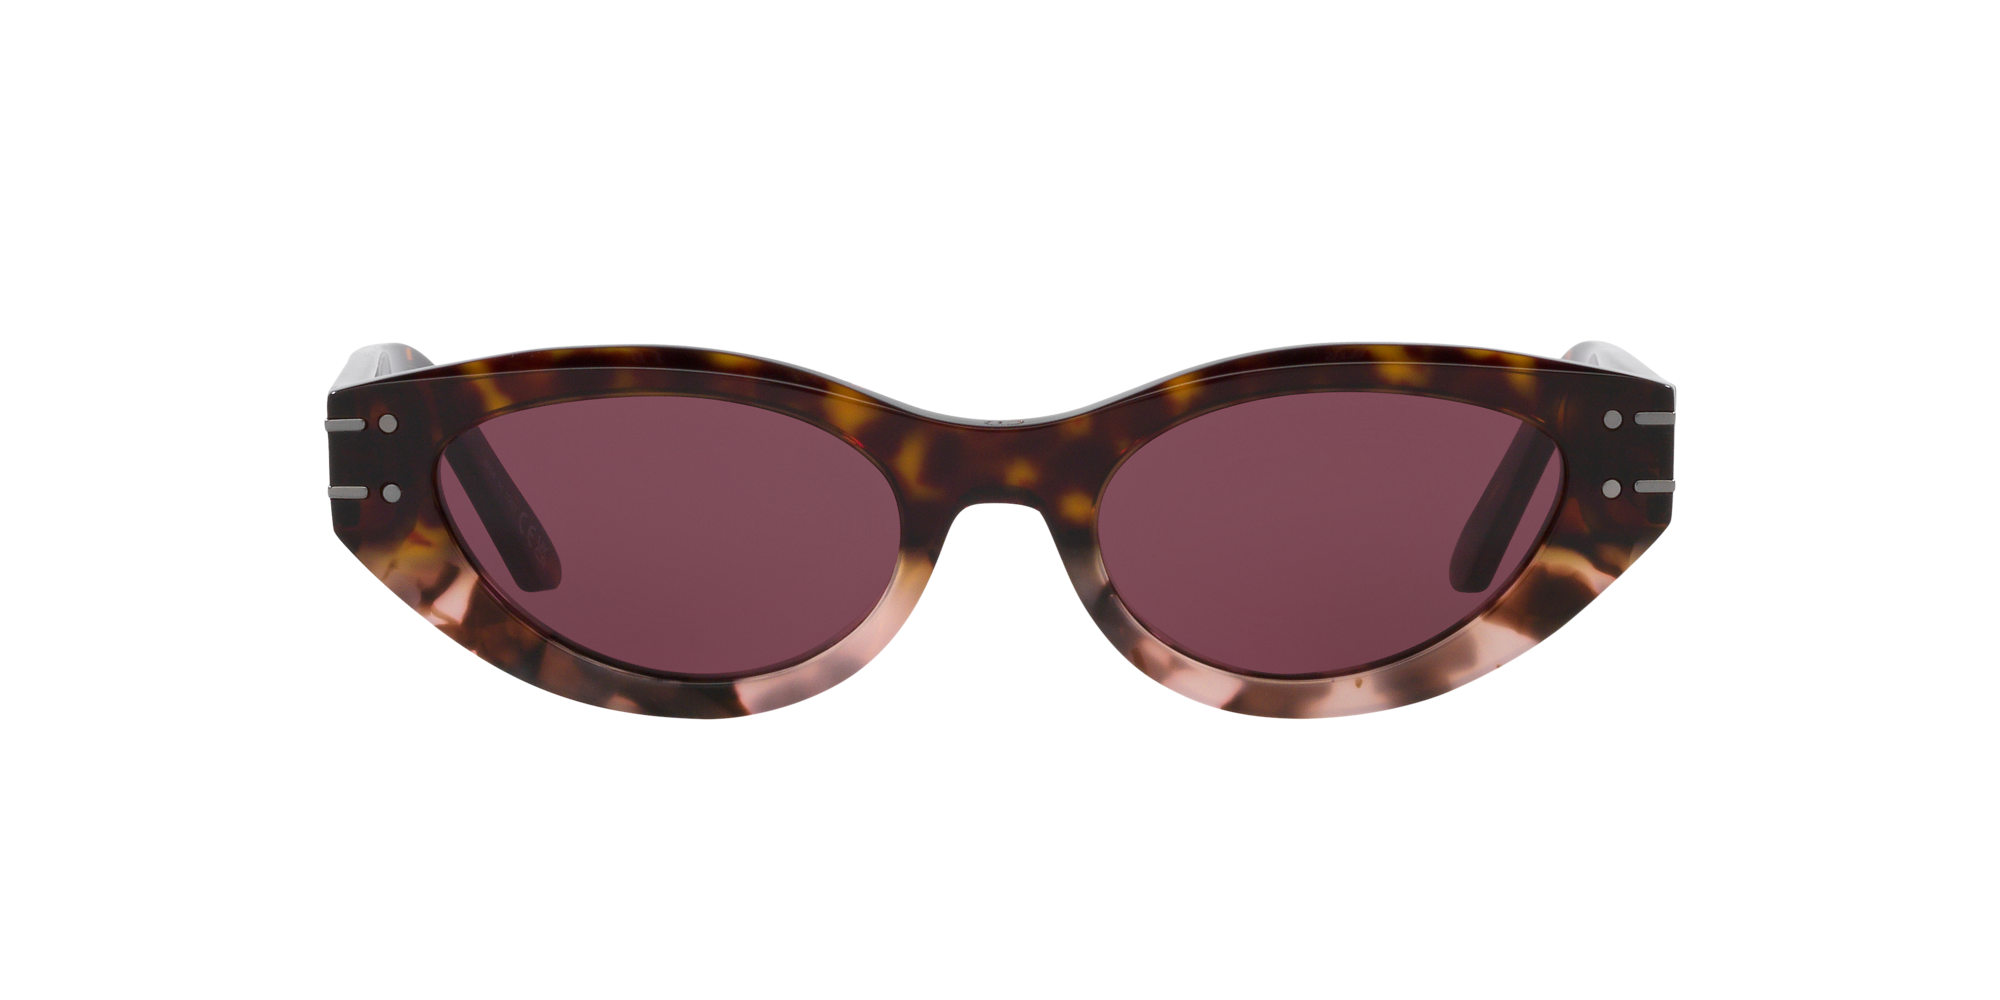 Check out Ralph RA4004 sunglasses from Sunglass Hut http://www.sunglasshut.com/us/805289303756  | Sunglasses, Sunglasses women aviators, Sunglasses women